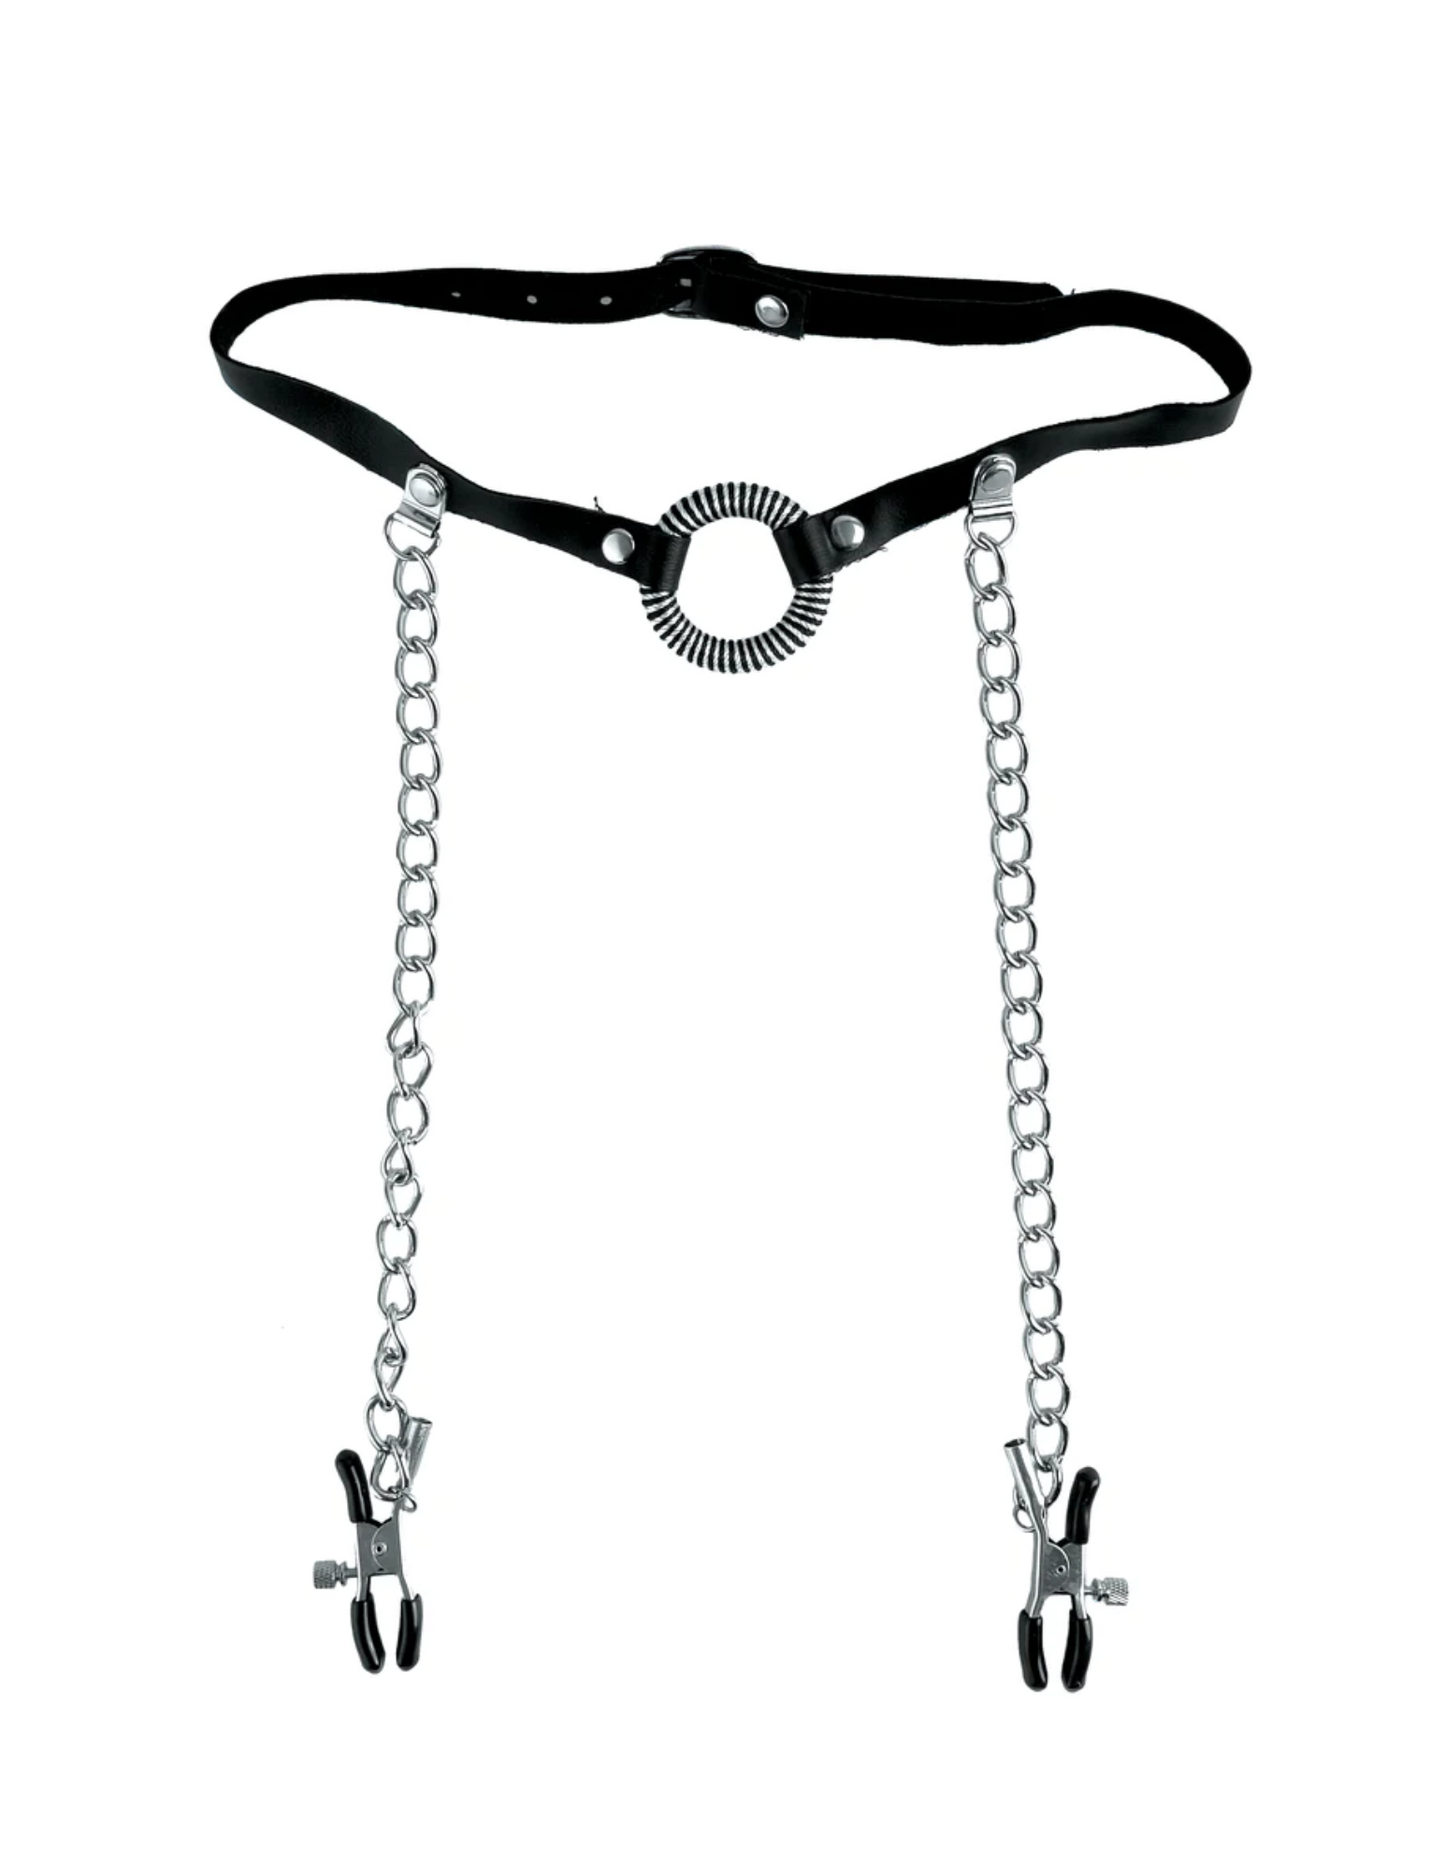 Full view of the etish Fantasy Series O-Ring Gag and Nipple Clamps from Pipedreams (black).